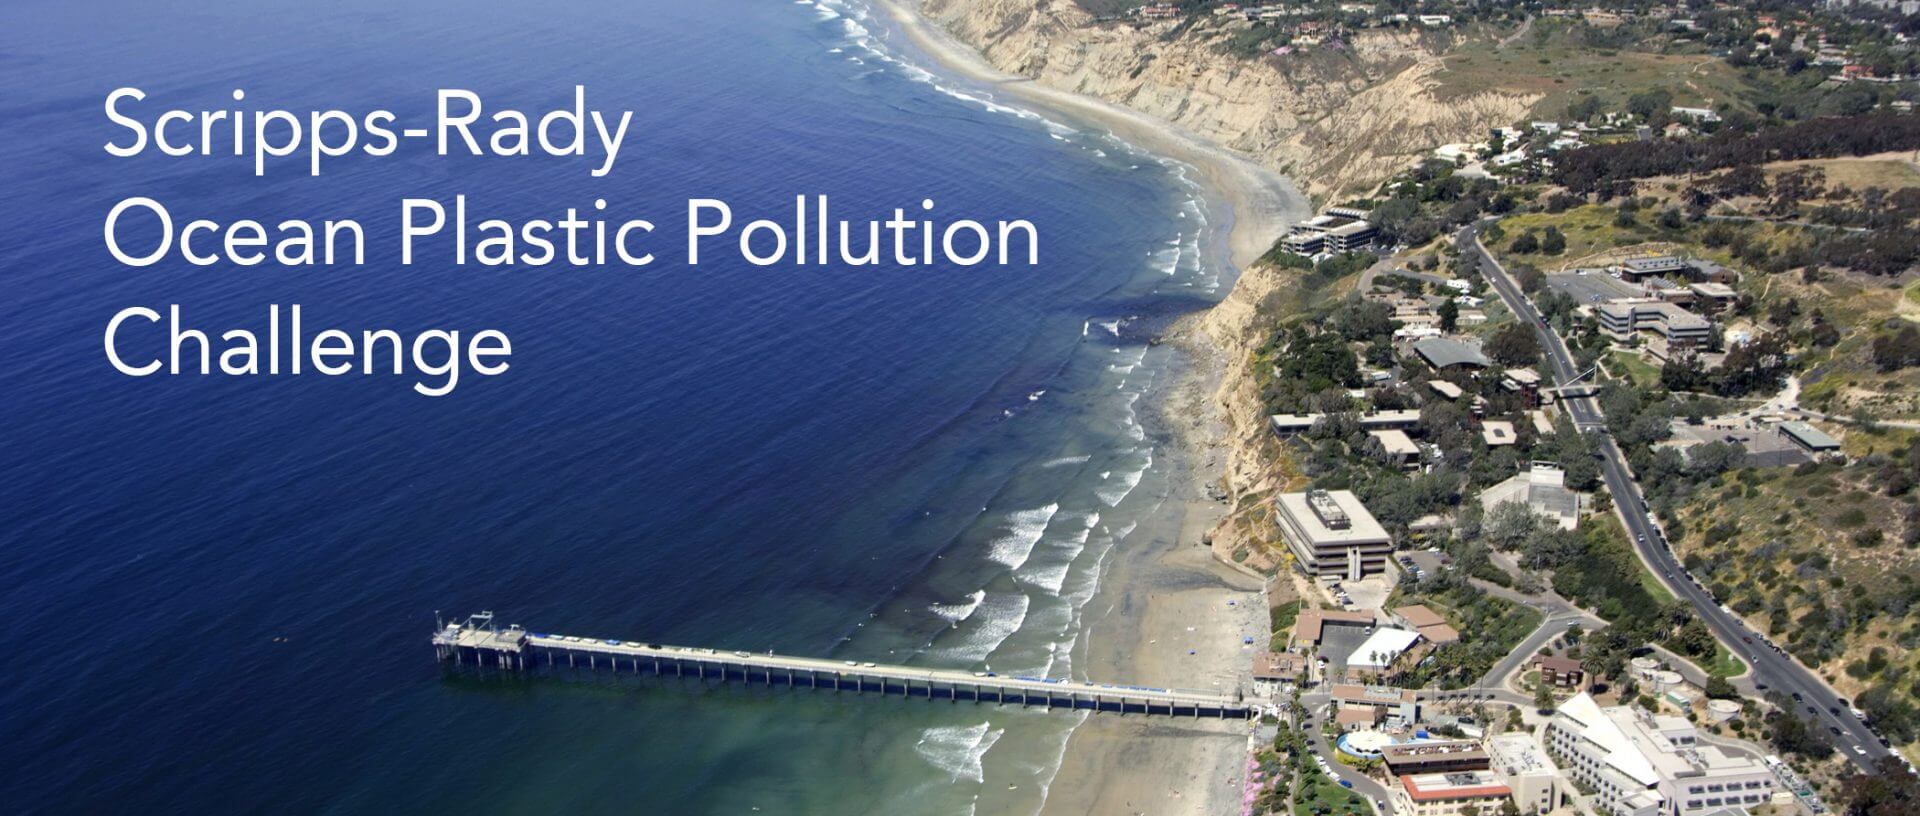 Featured image for “Scripps-Rady Ocean Plastic Pollution Challenge”